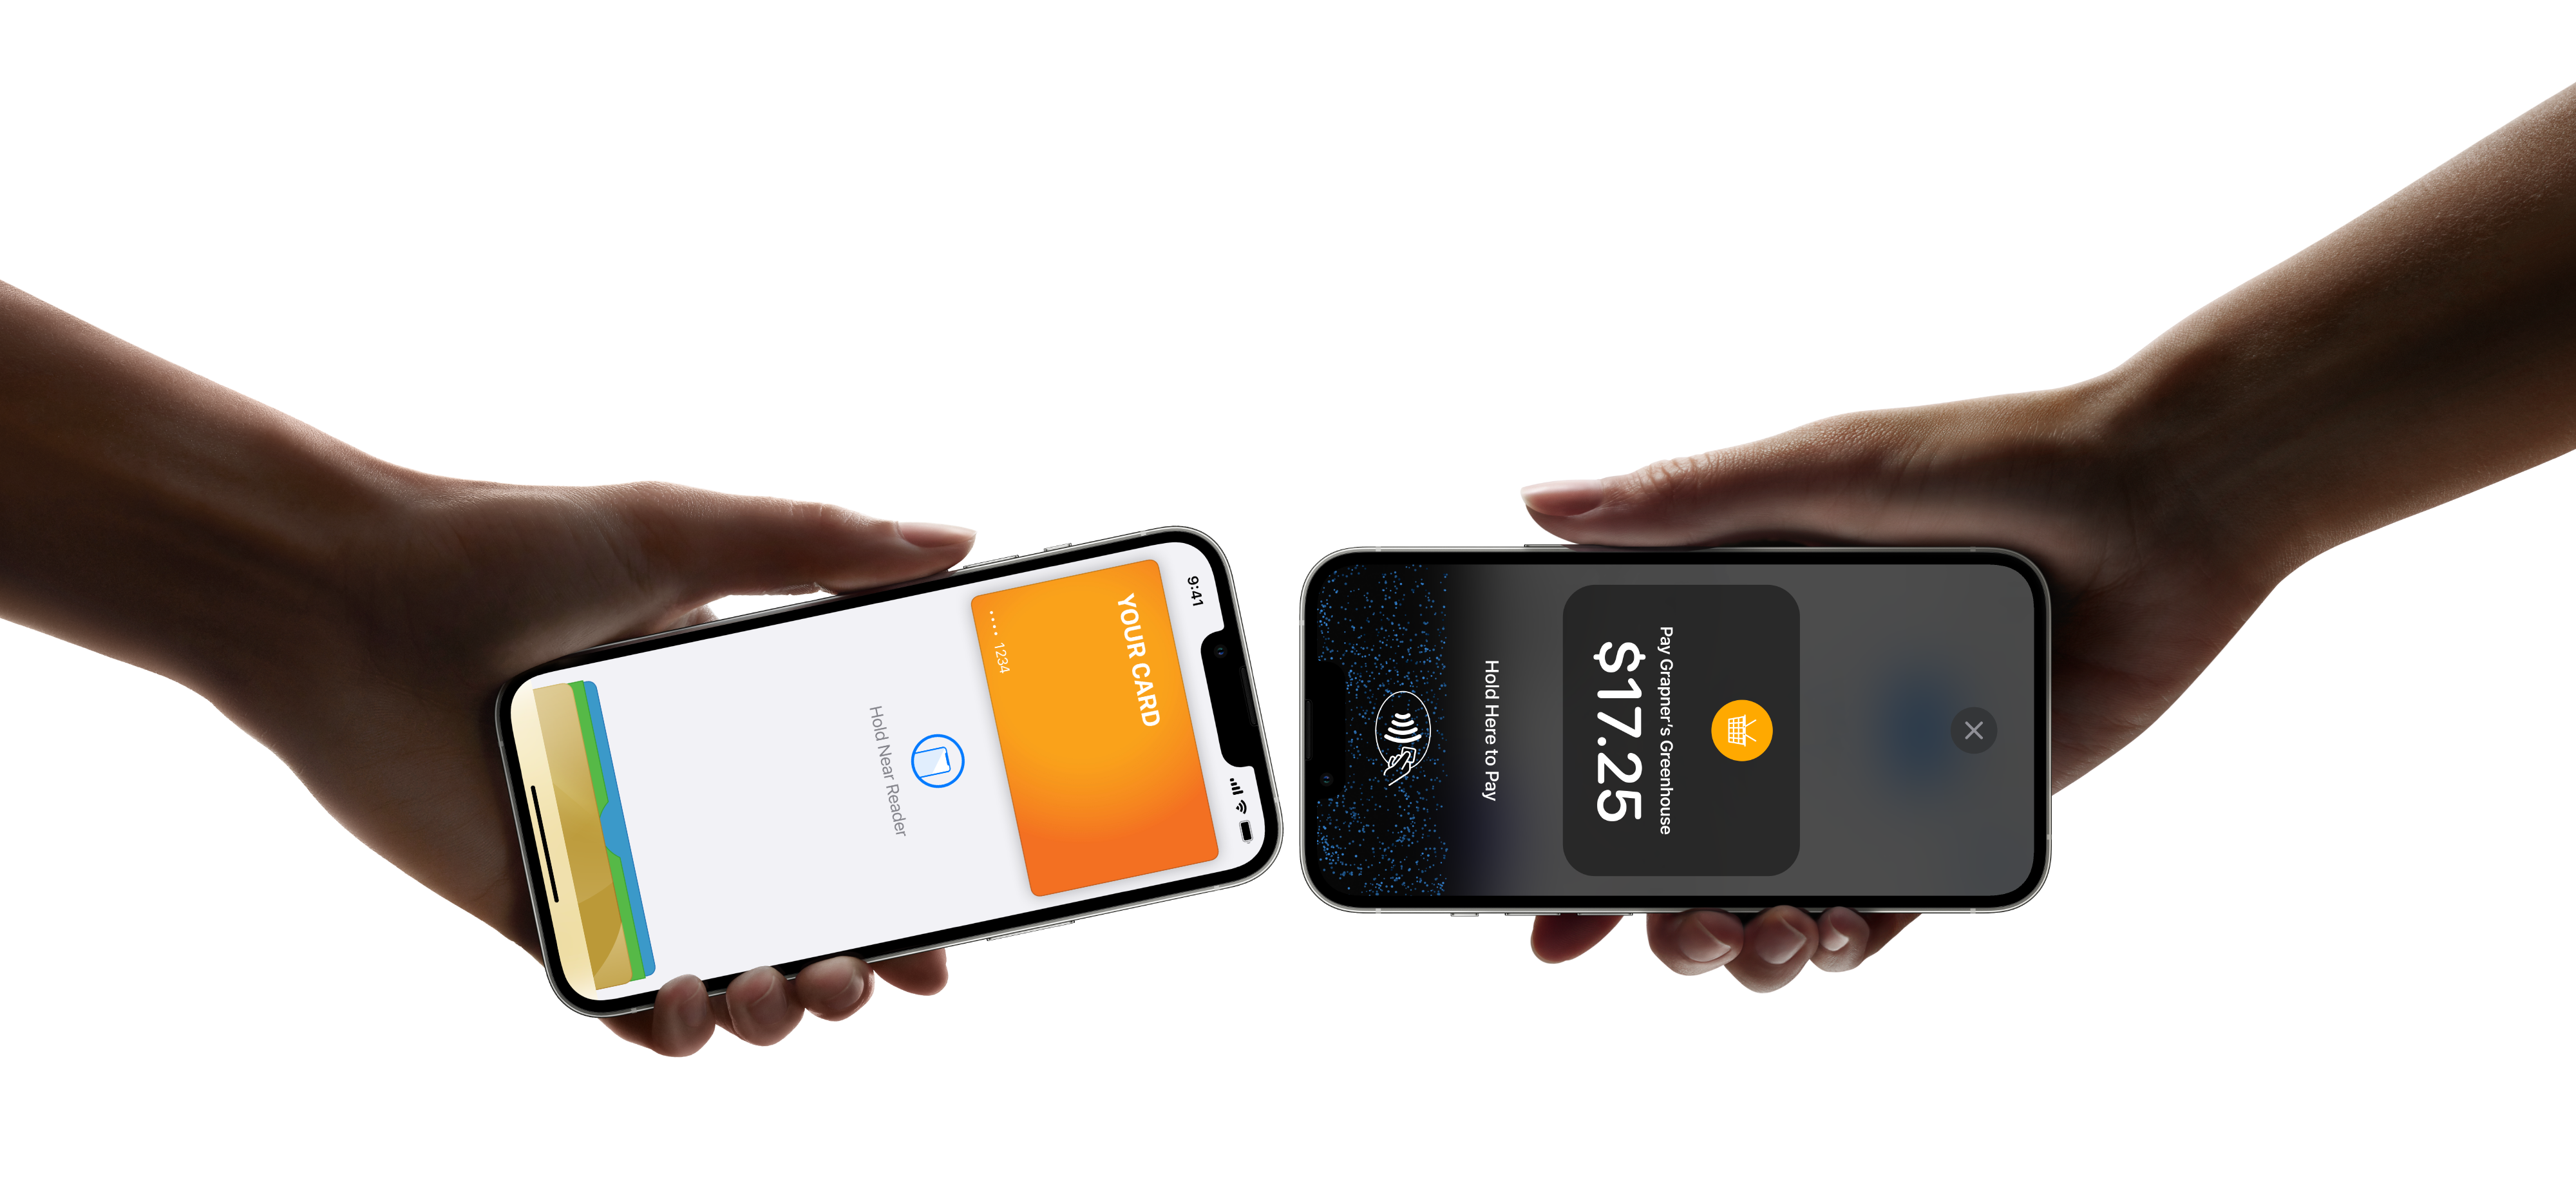 Contactless payment with Tap to Pay on iPhone